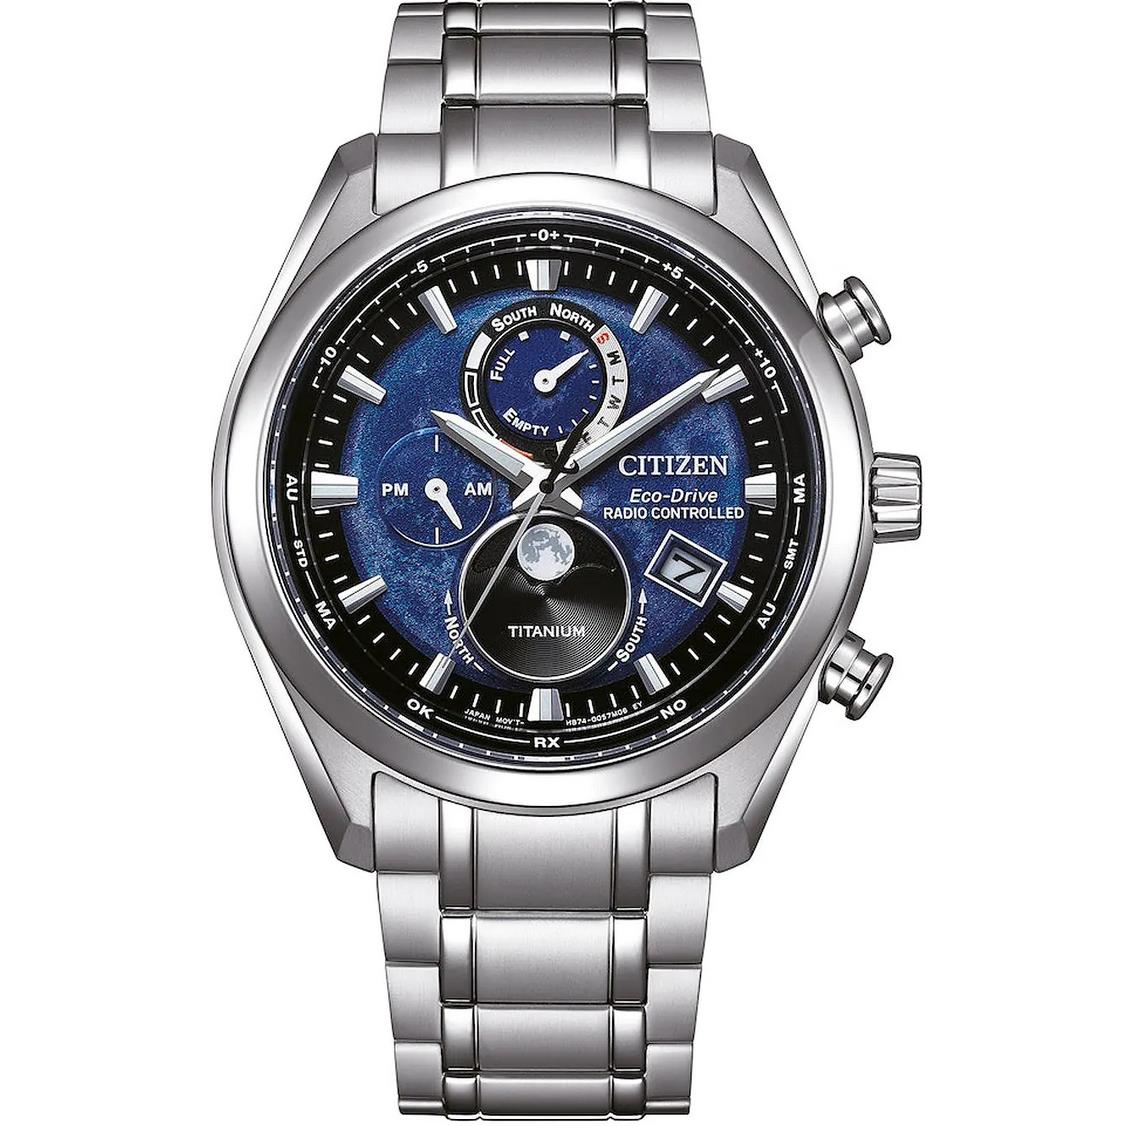 Citizen Titanium Sapphire Moonphase Radio Controlled BY1010-81L Blue Dial Watch - Dial: Blue, Band: Silver, Bezel: Black